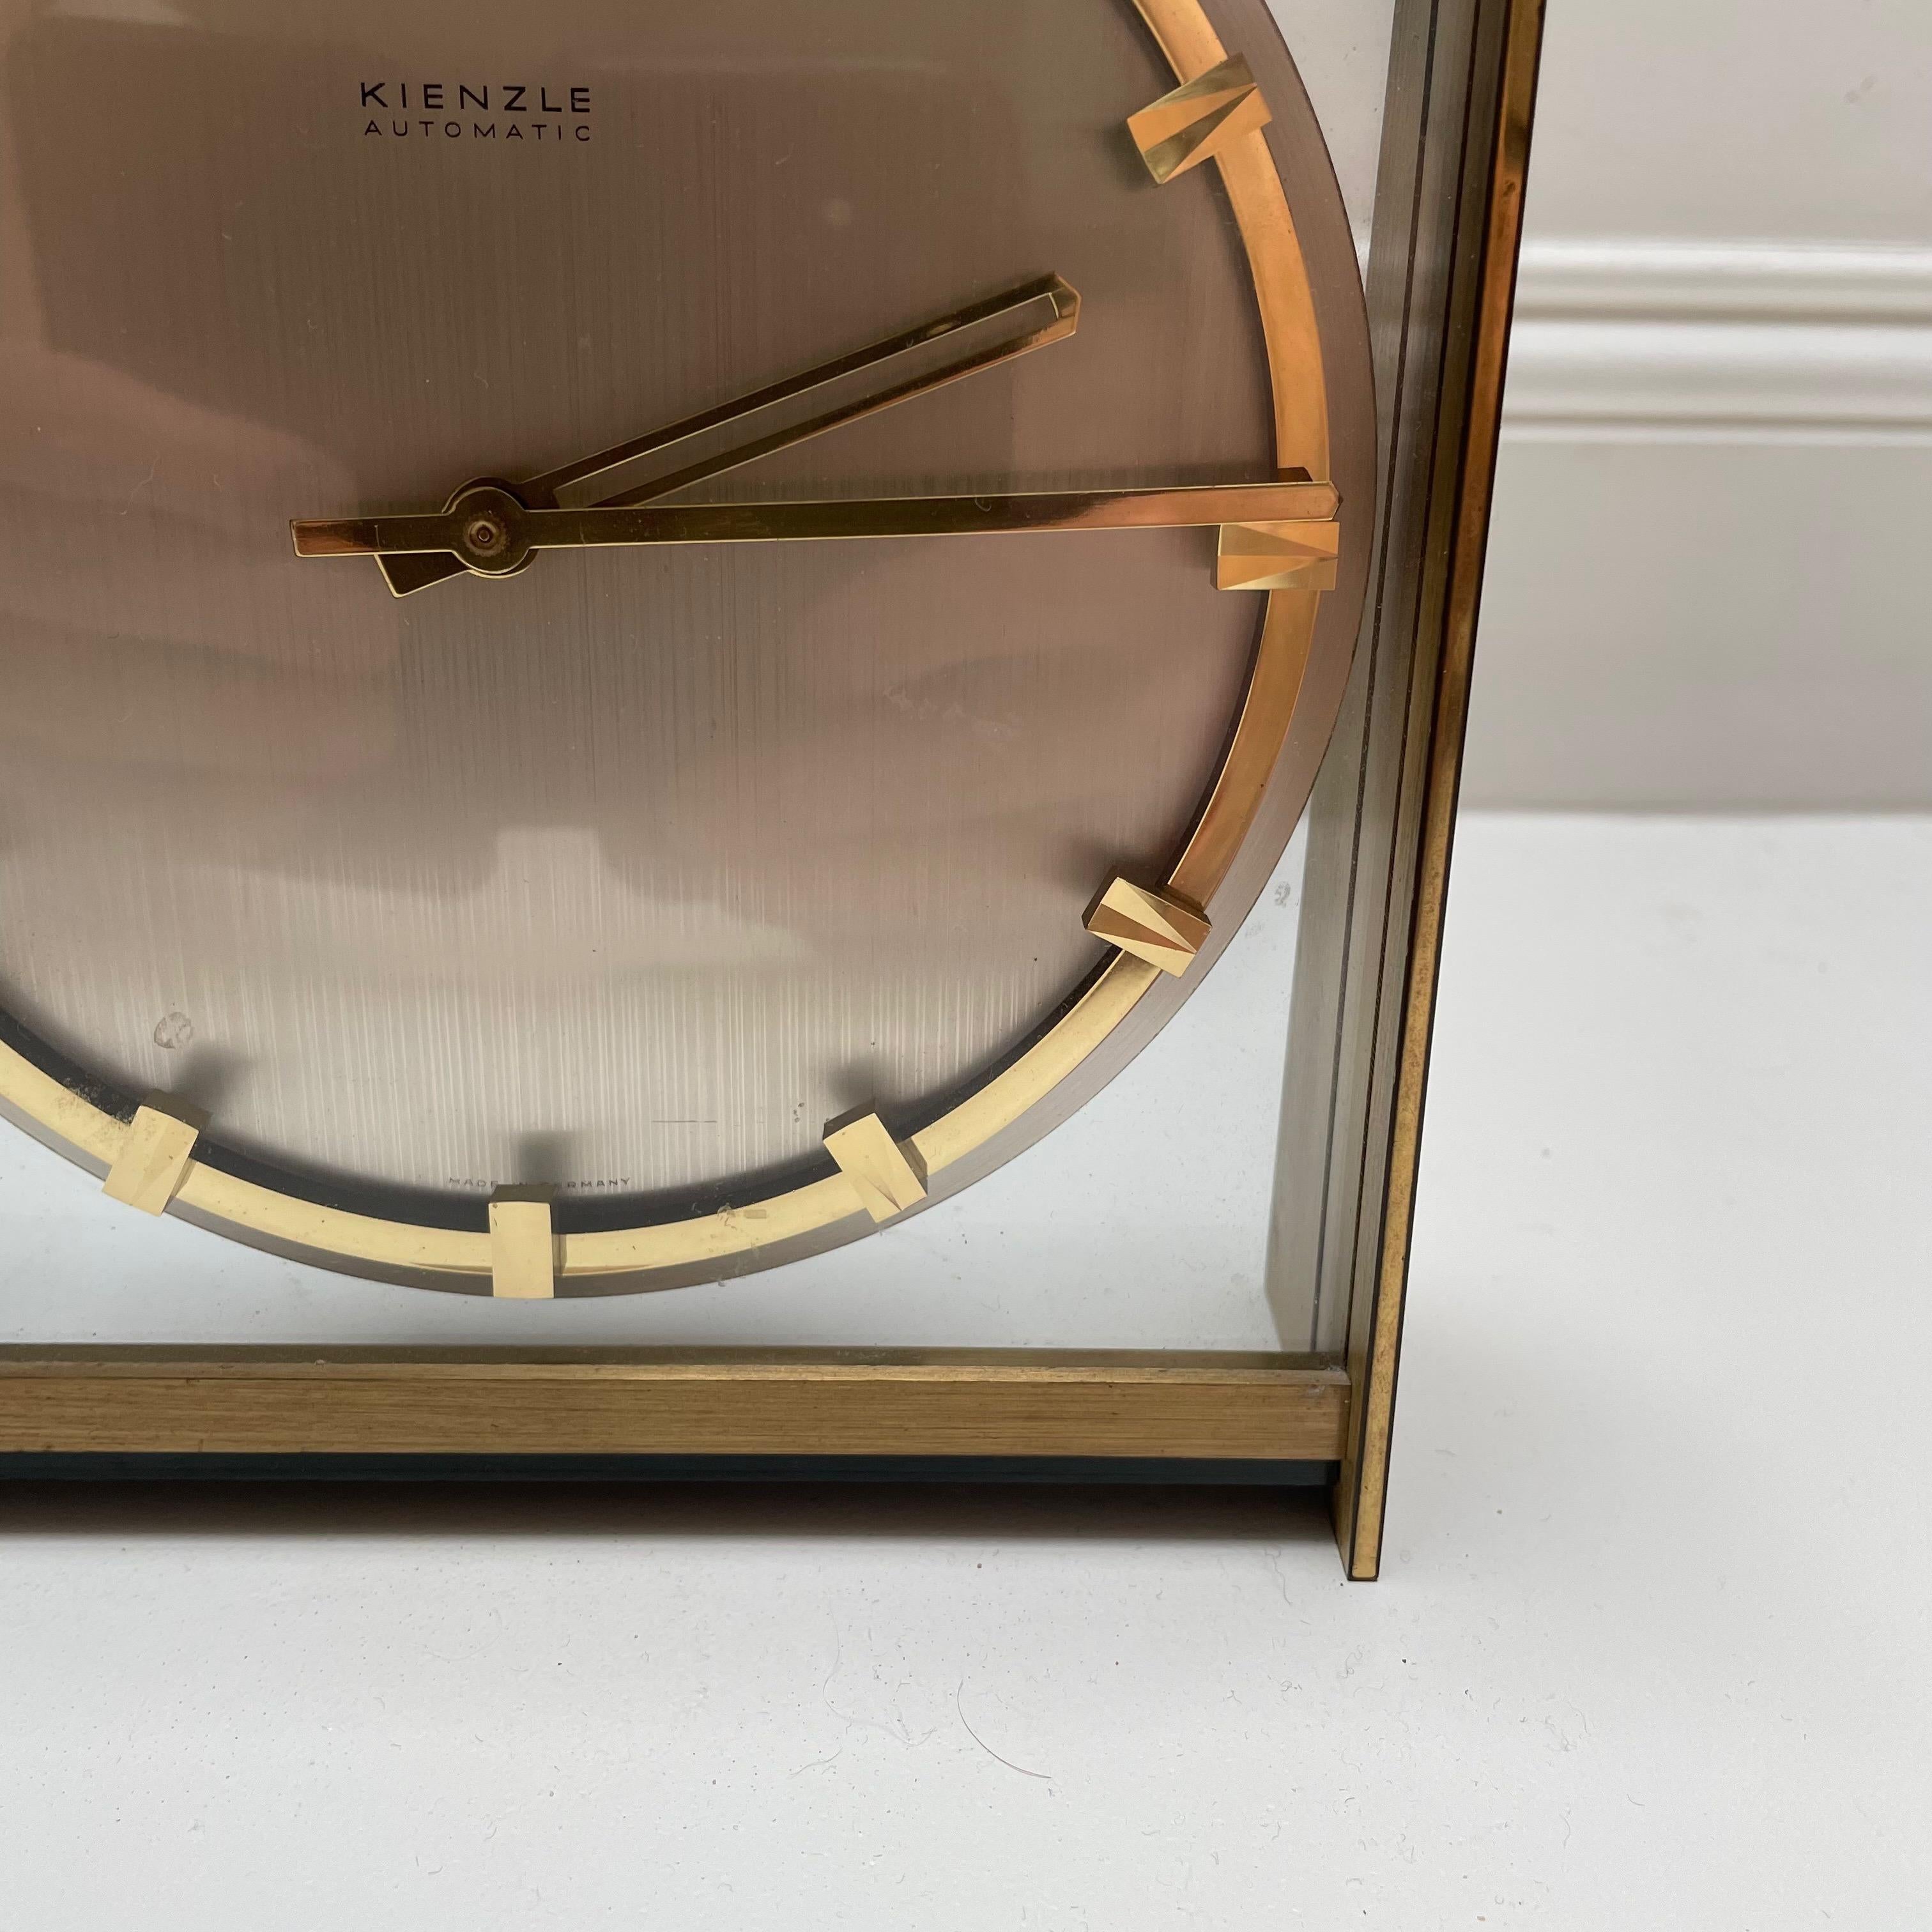 Vintage 1960s Hollywood Regency Brass Glass Table Clock by Kienzle, Germany In Good Condition For Sale In Kirchlengern, DE